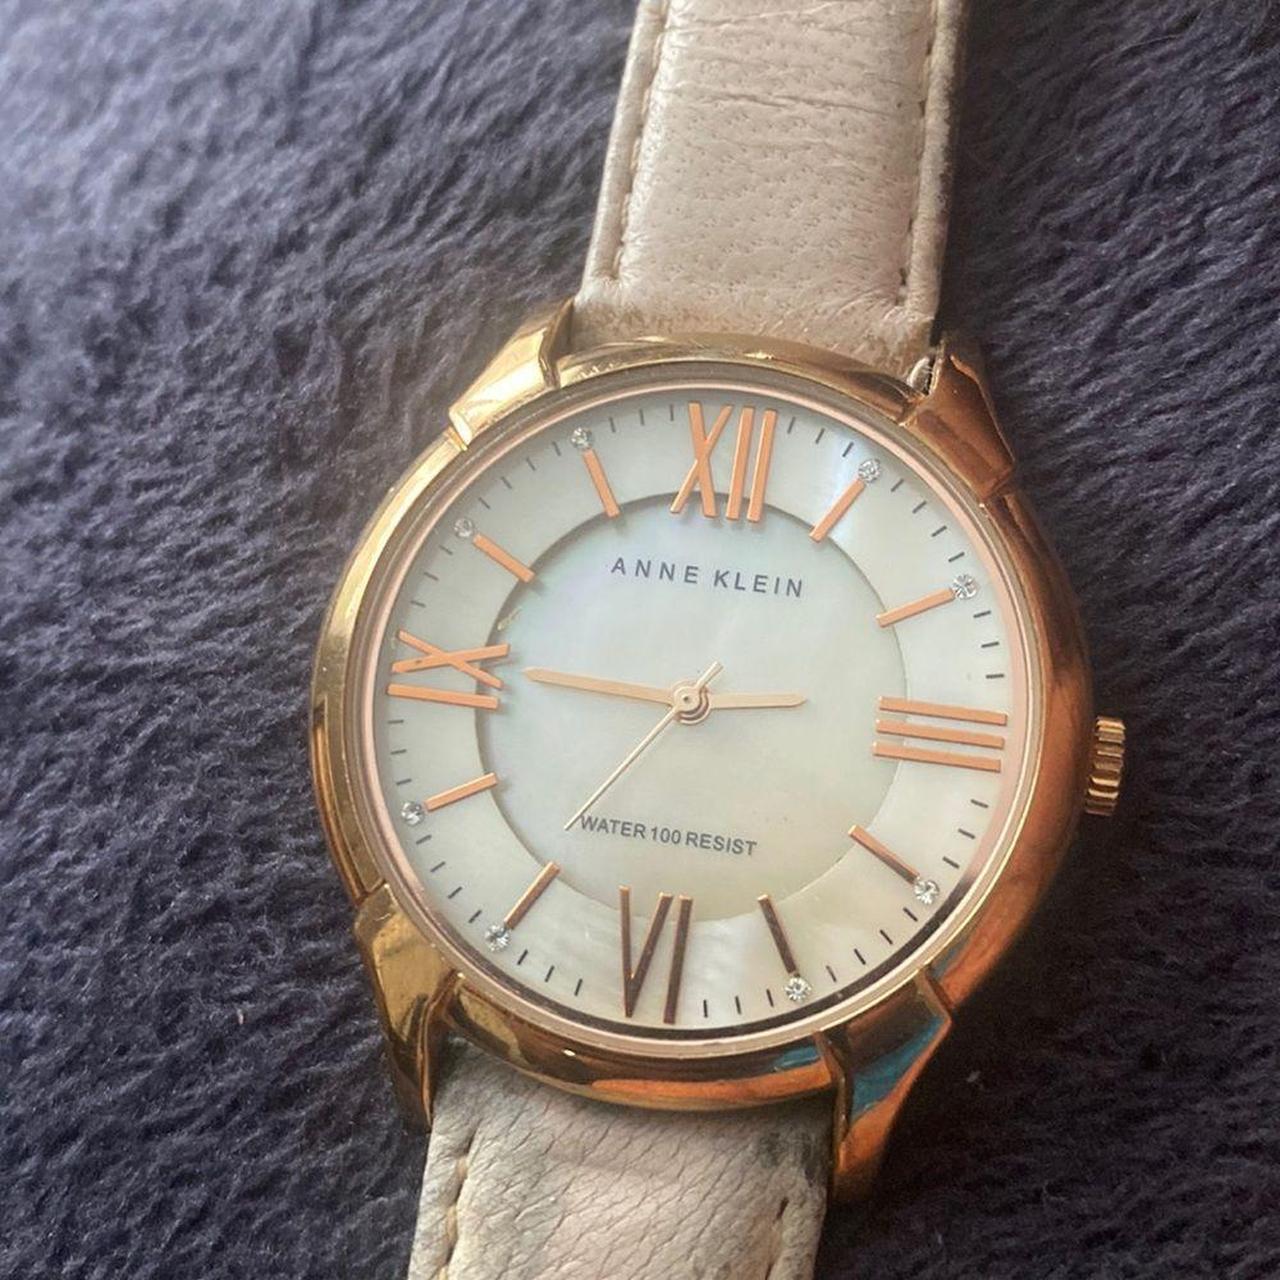 Product Image 1 - Watch is in great condition!